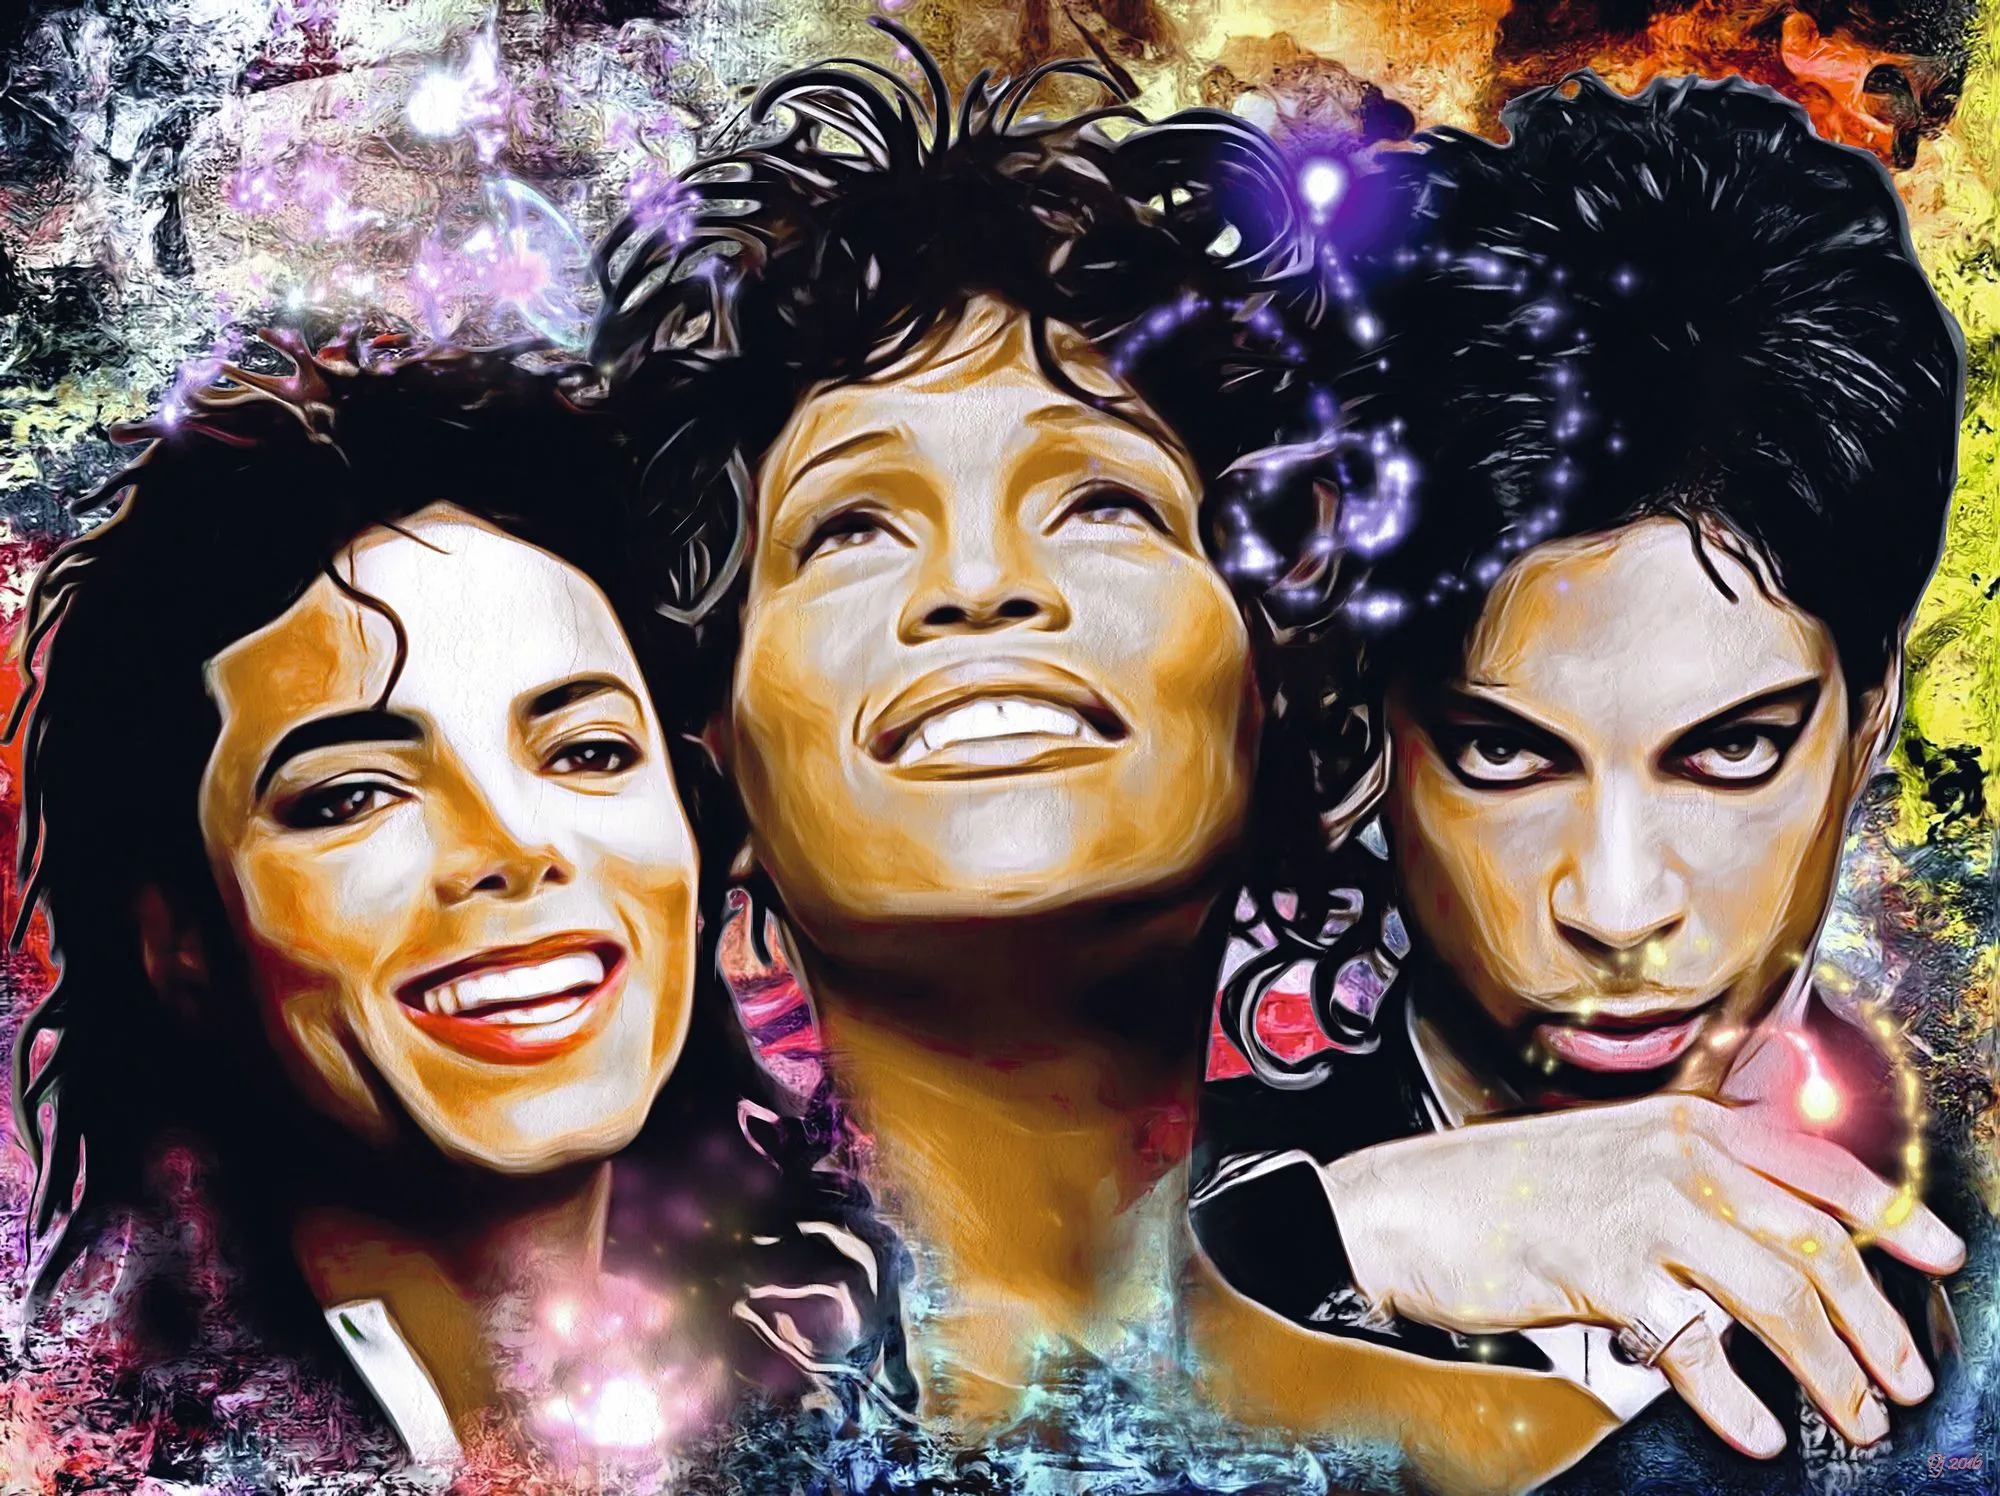 The King, the Queen and the Prince (Michael Jackson , Whitney Houston and Prince), by Daniel Janda, 2018. 